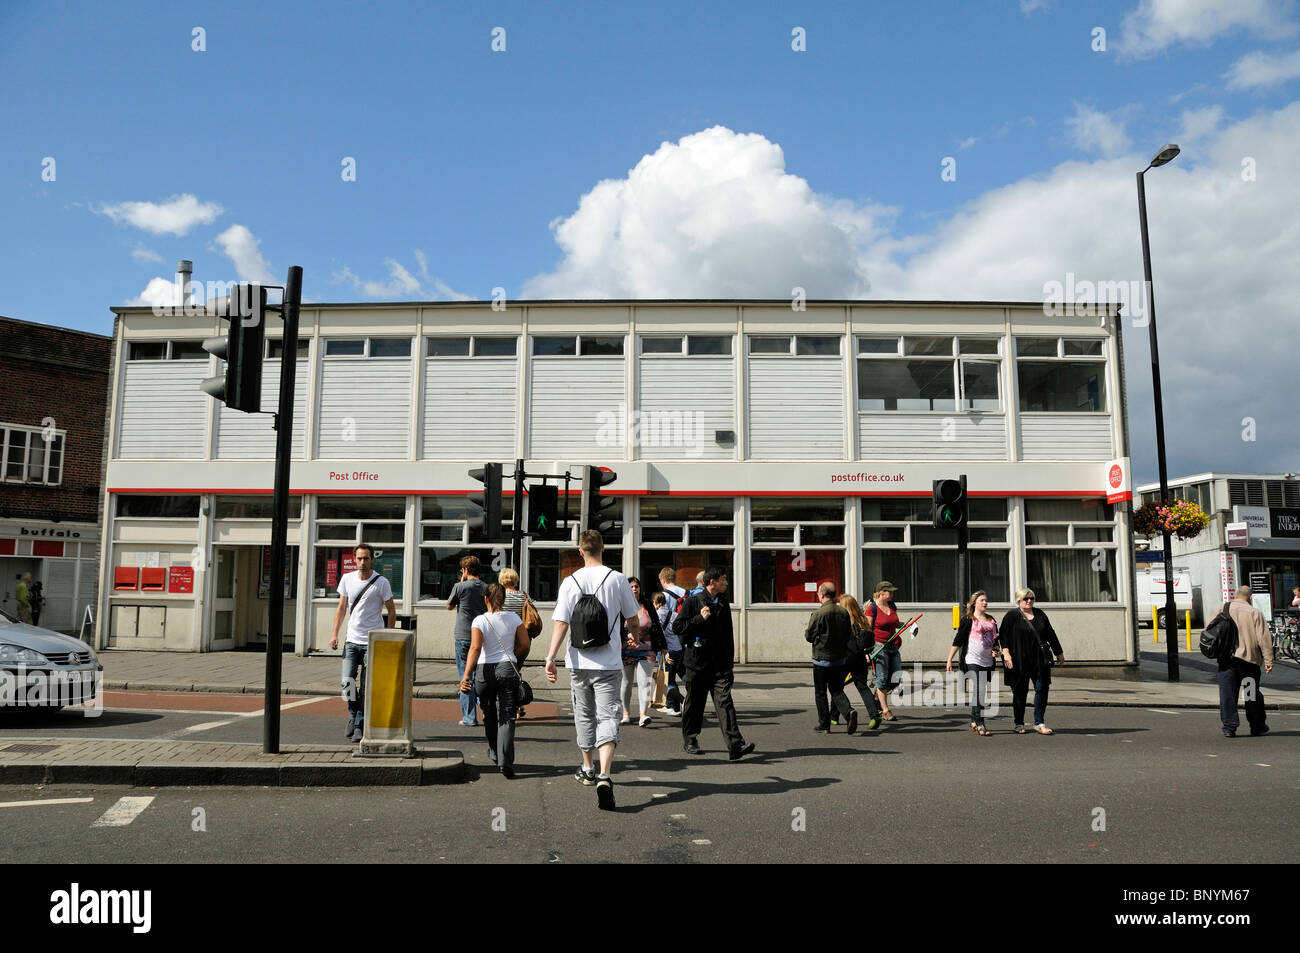 Pedestrians crossing the road at Highbury Corner with Post Office in background, Islington London England Britain UK Stock Photo